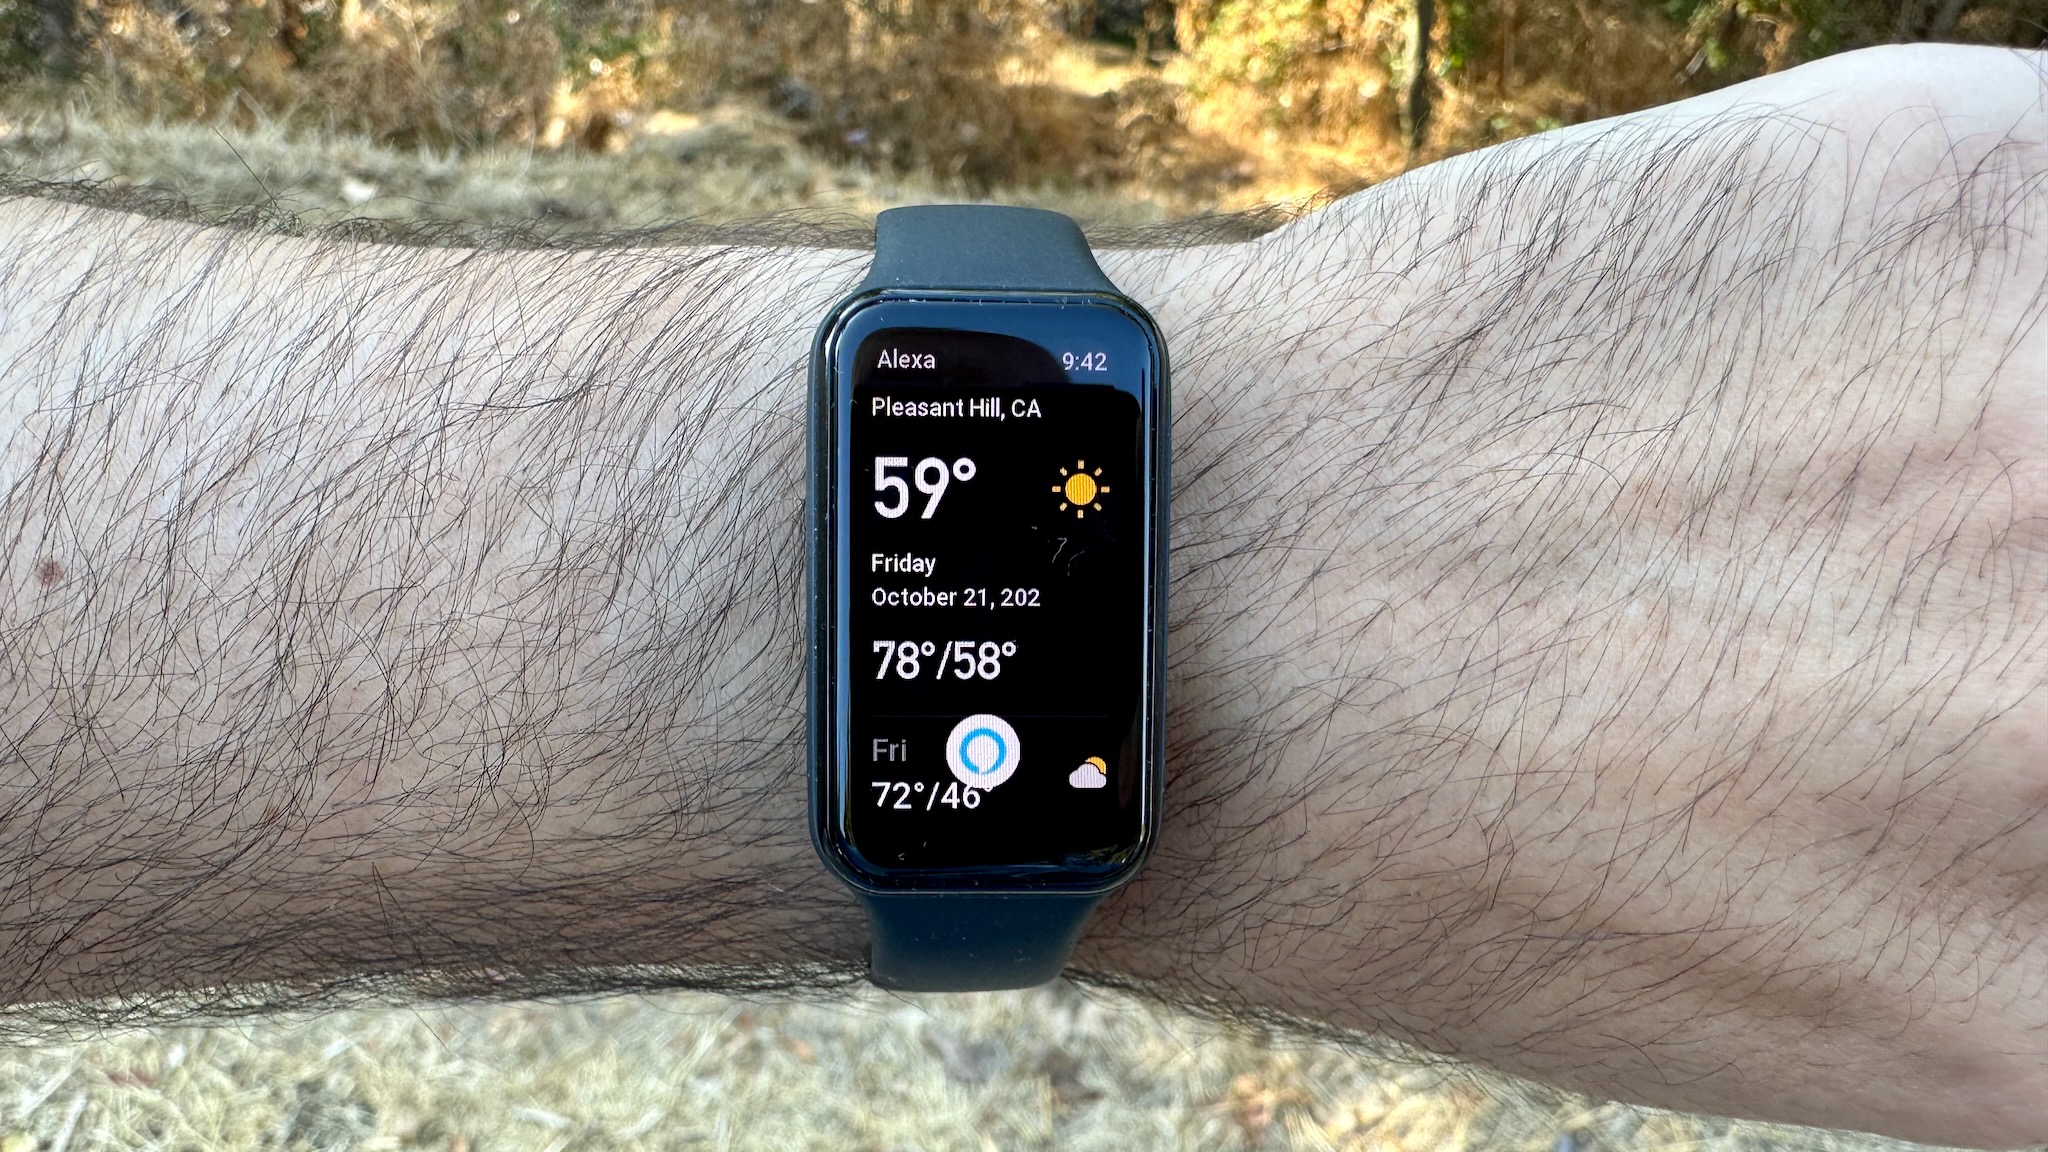 A results screen for the local weather with the Alexa icon visible on the Amazfit Band 7